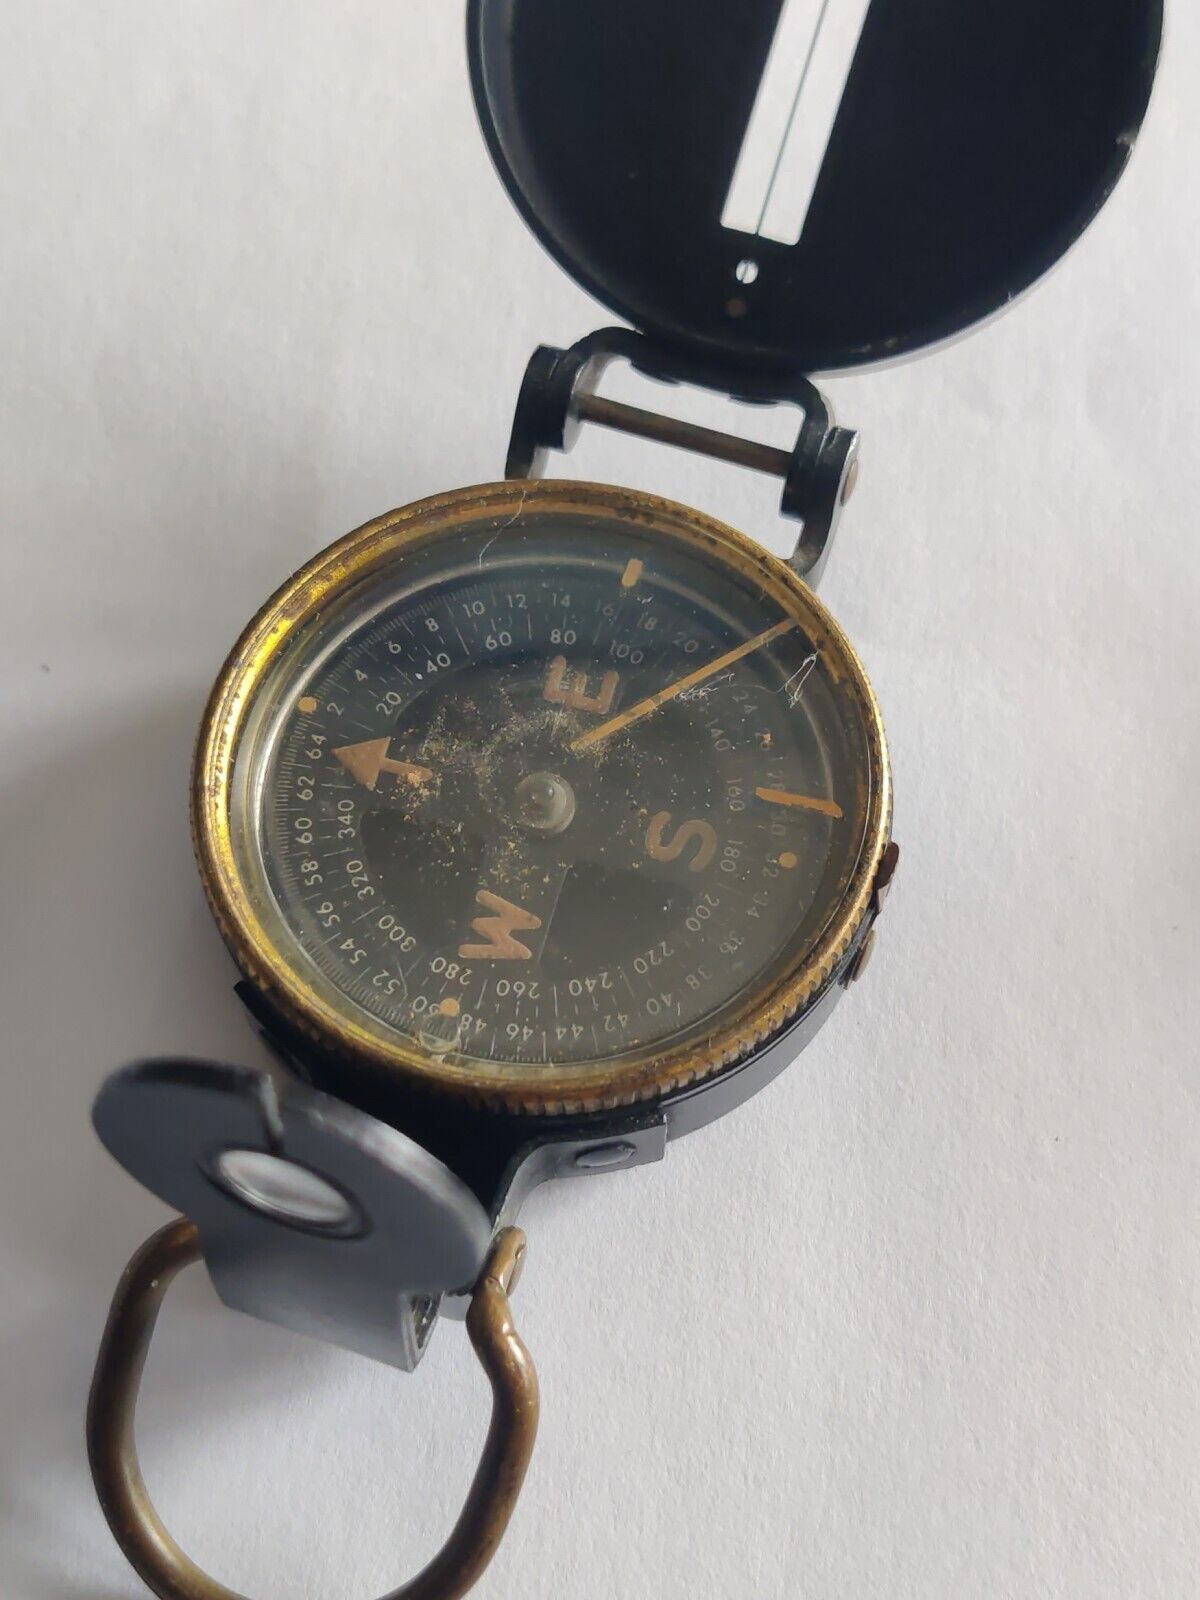 Vintage WWII Era US ARMY Corps of Engineers Superior Magneto Field Compass